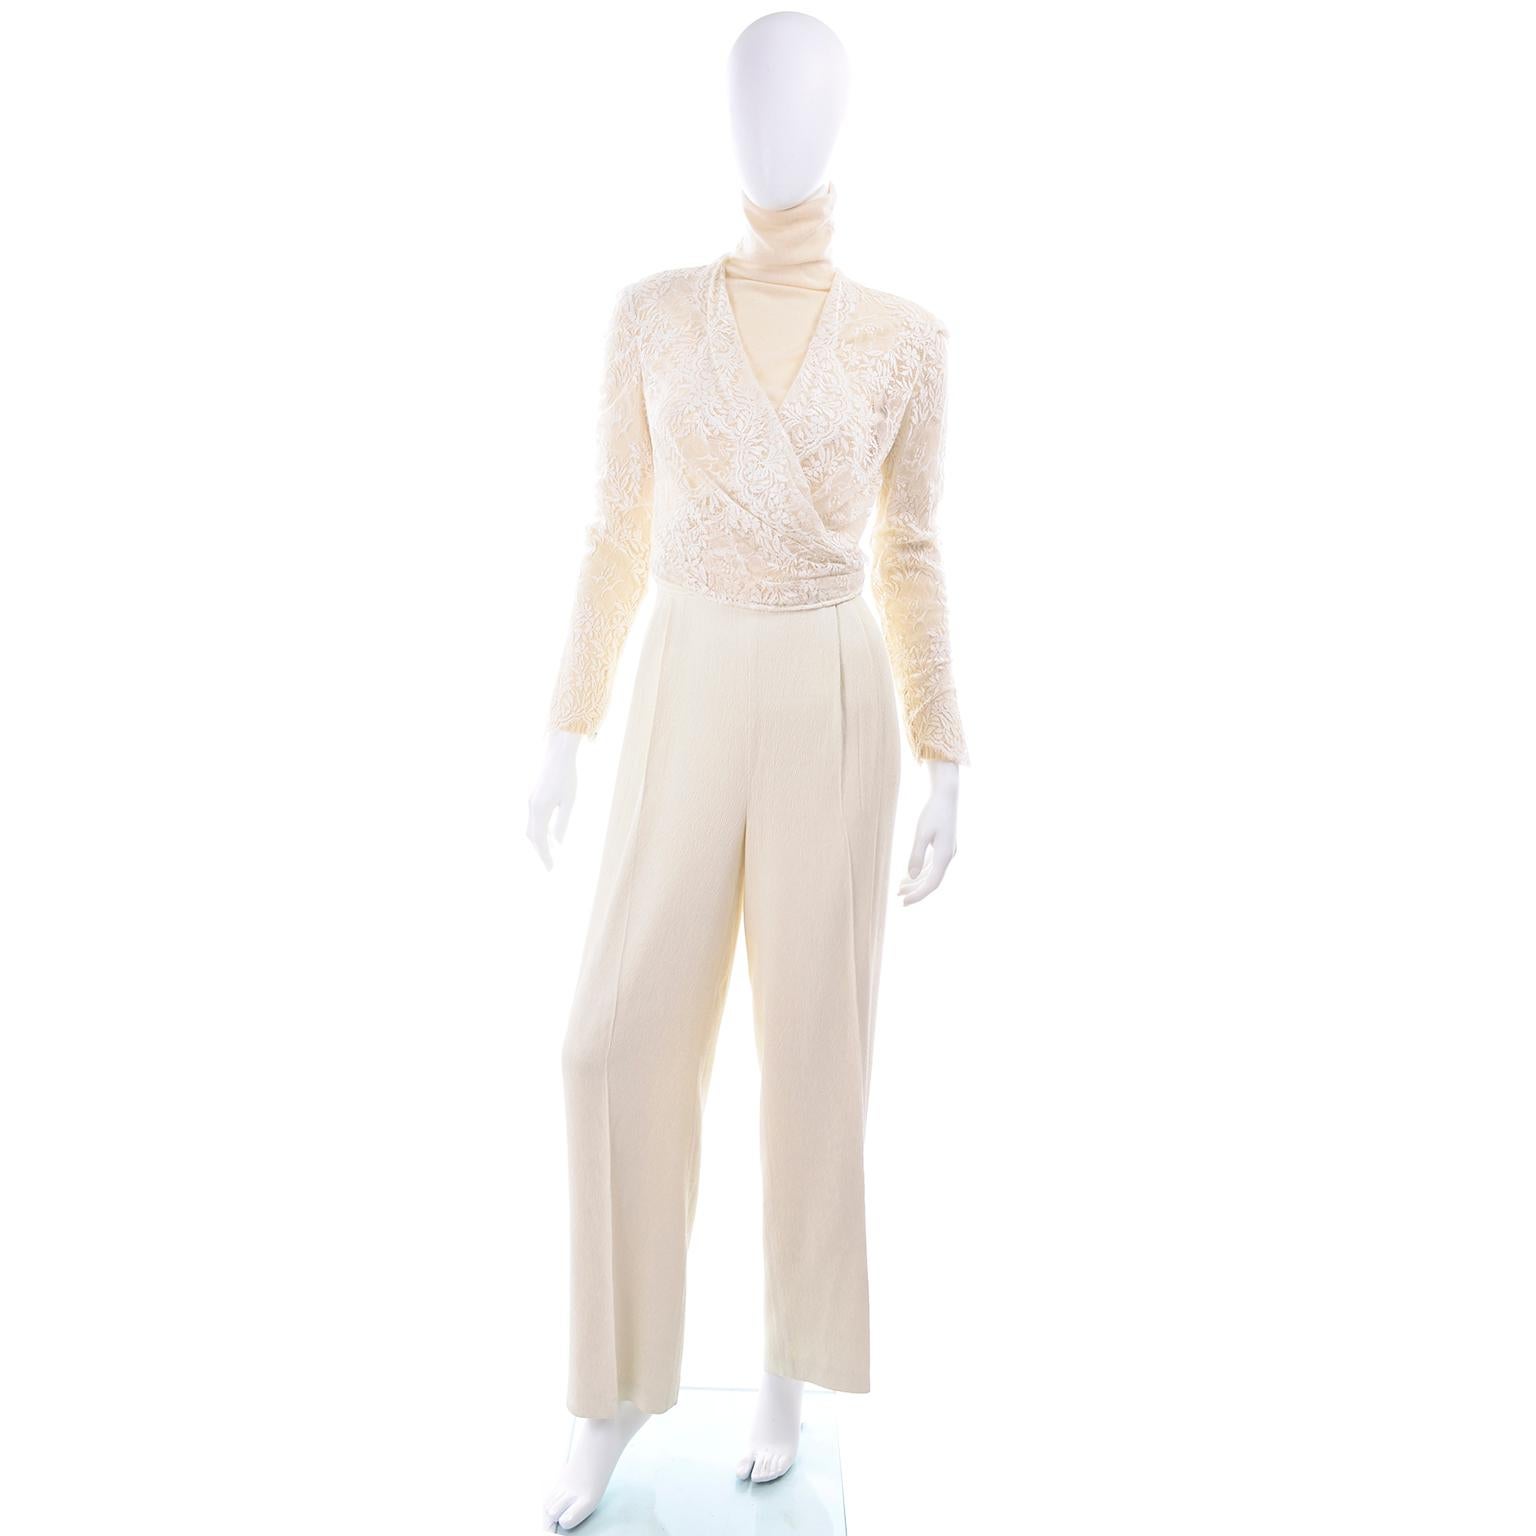 This beautiful, sophisticated Valentino outfit includes a cream cashmere turtleneck sweater, an ivory lace wrap top and a pair of beautiful textured woven high waist trousers. The pants don't have a content label but feel like a silk or rayon crepe